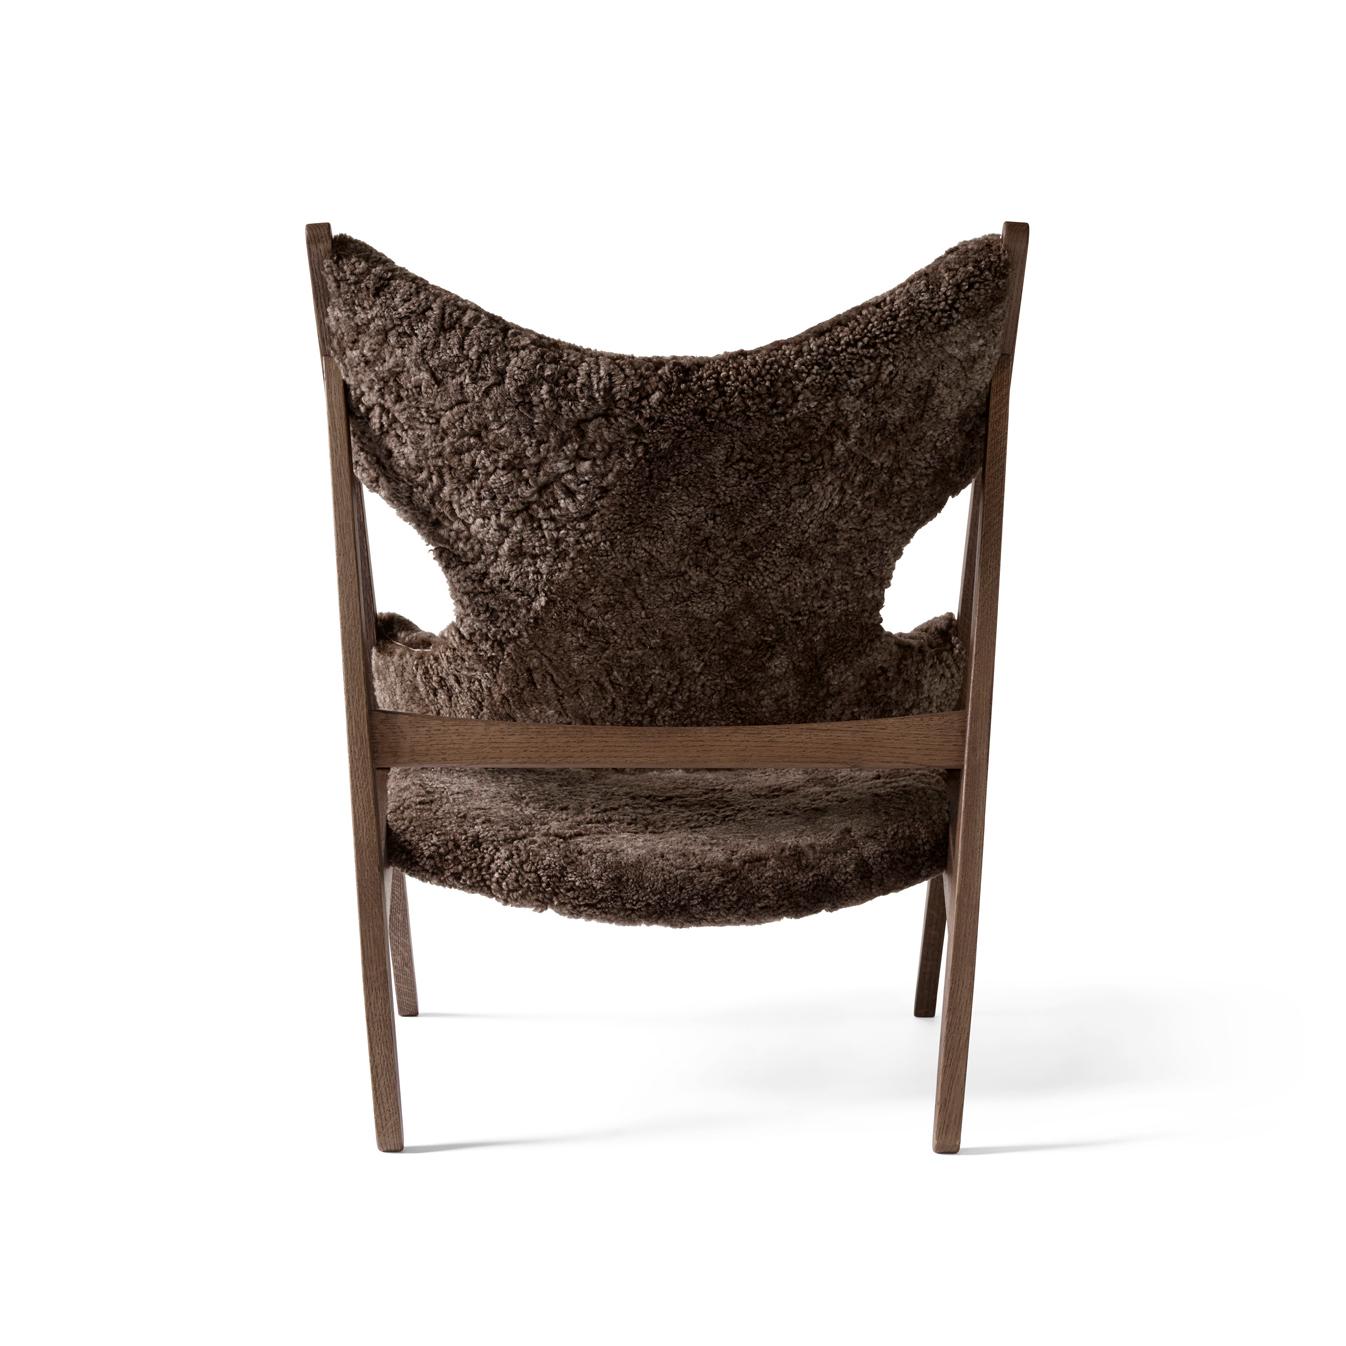 Defined by an exposed, triangular construction, a gently curved seat and back ideally pitched for relaxation, and distinctive cut-outs for resting the elbows when reading (or, of course, knitting), the Knitting Chair affirmed Kofod-Larsen’s